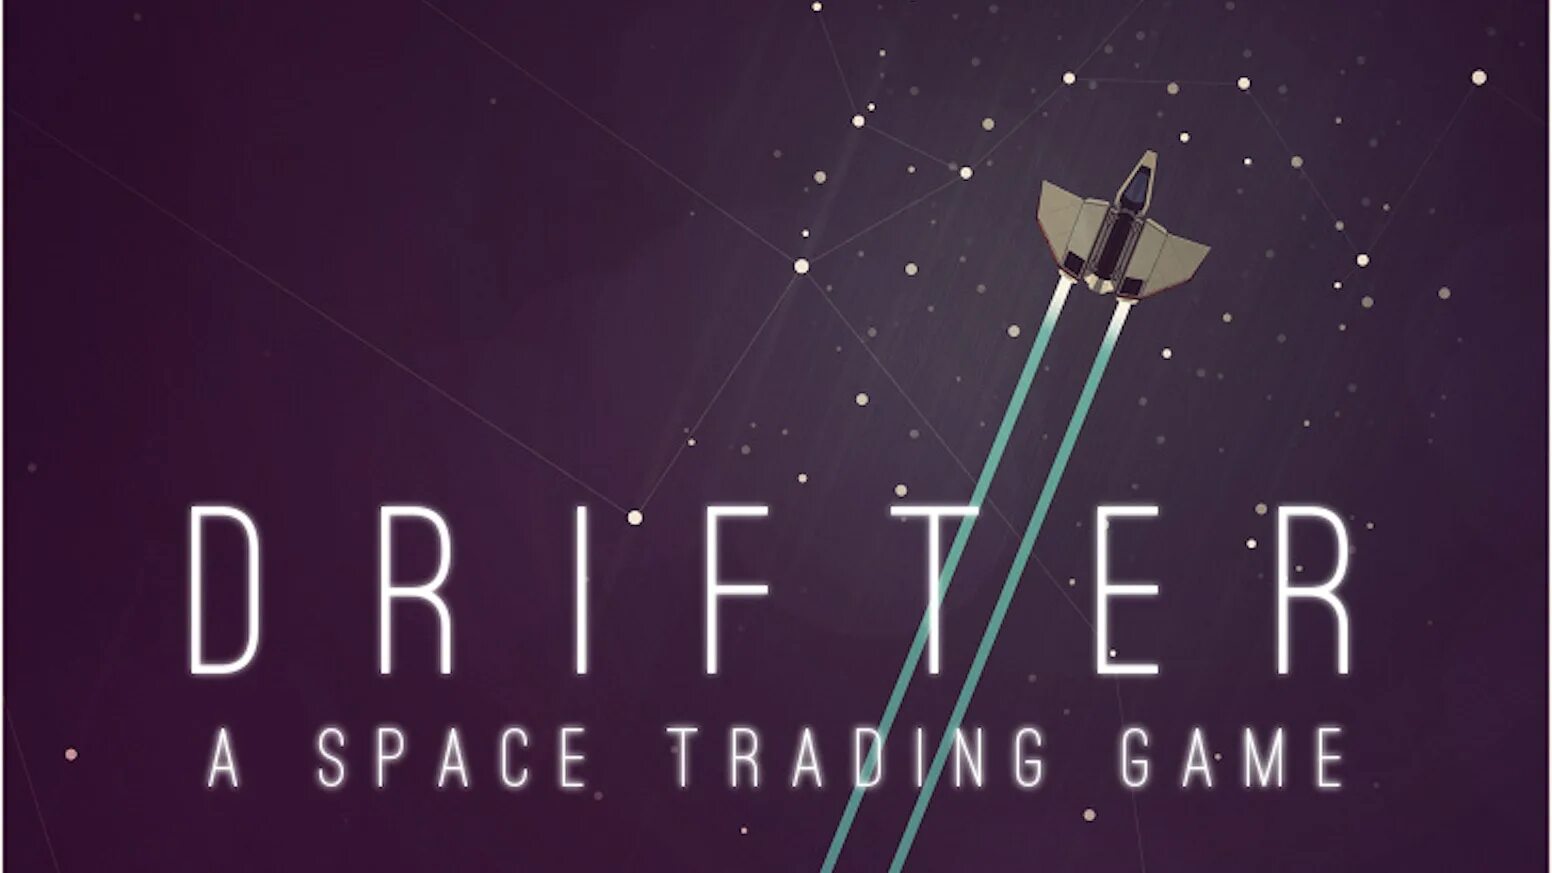 Space trader. Трейдинг космос. Ambitions Spaces.